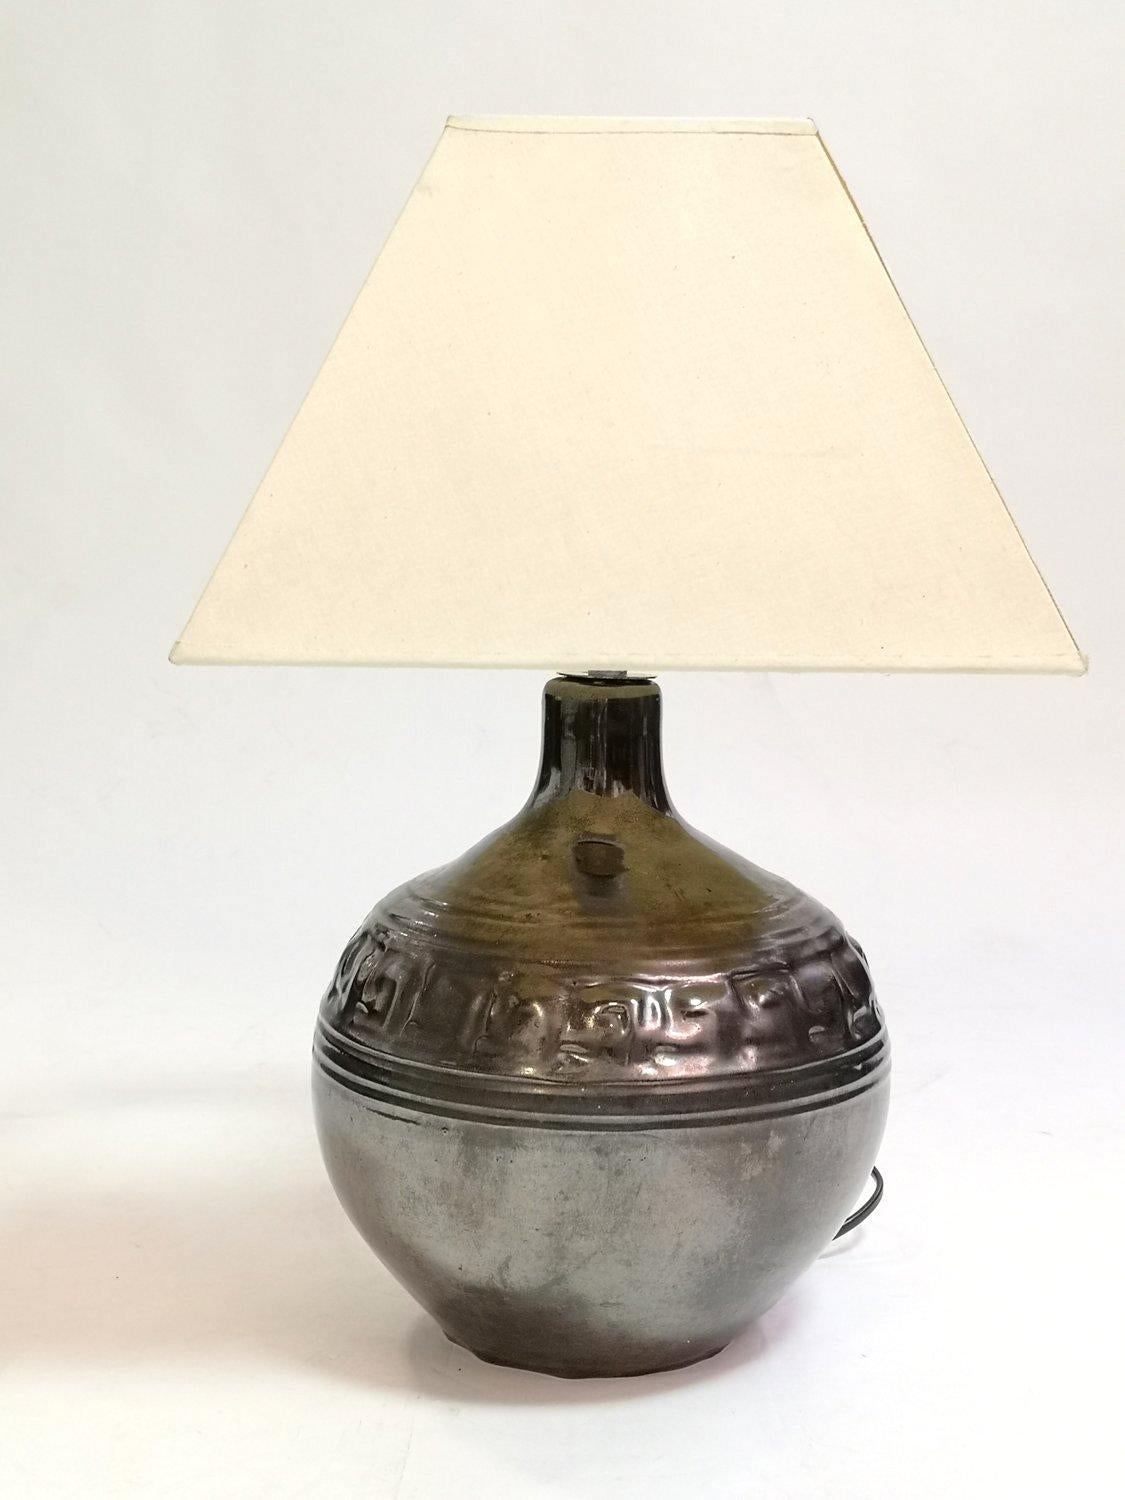 Special vintage ceramic table lamp, dark ceramic base coated with iridescent luster glaze, off-white cube lampshade. Unique handmade piece from the 70's. This special piece is in perfect working condition.
